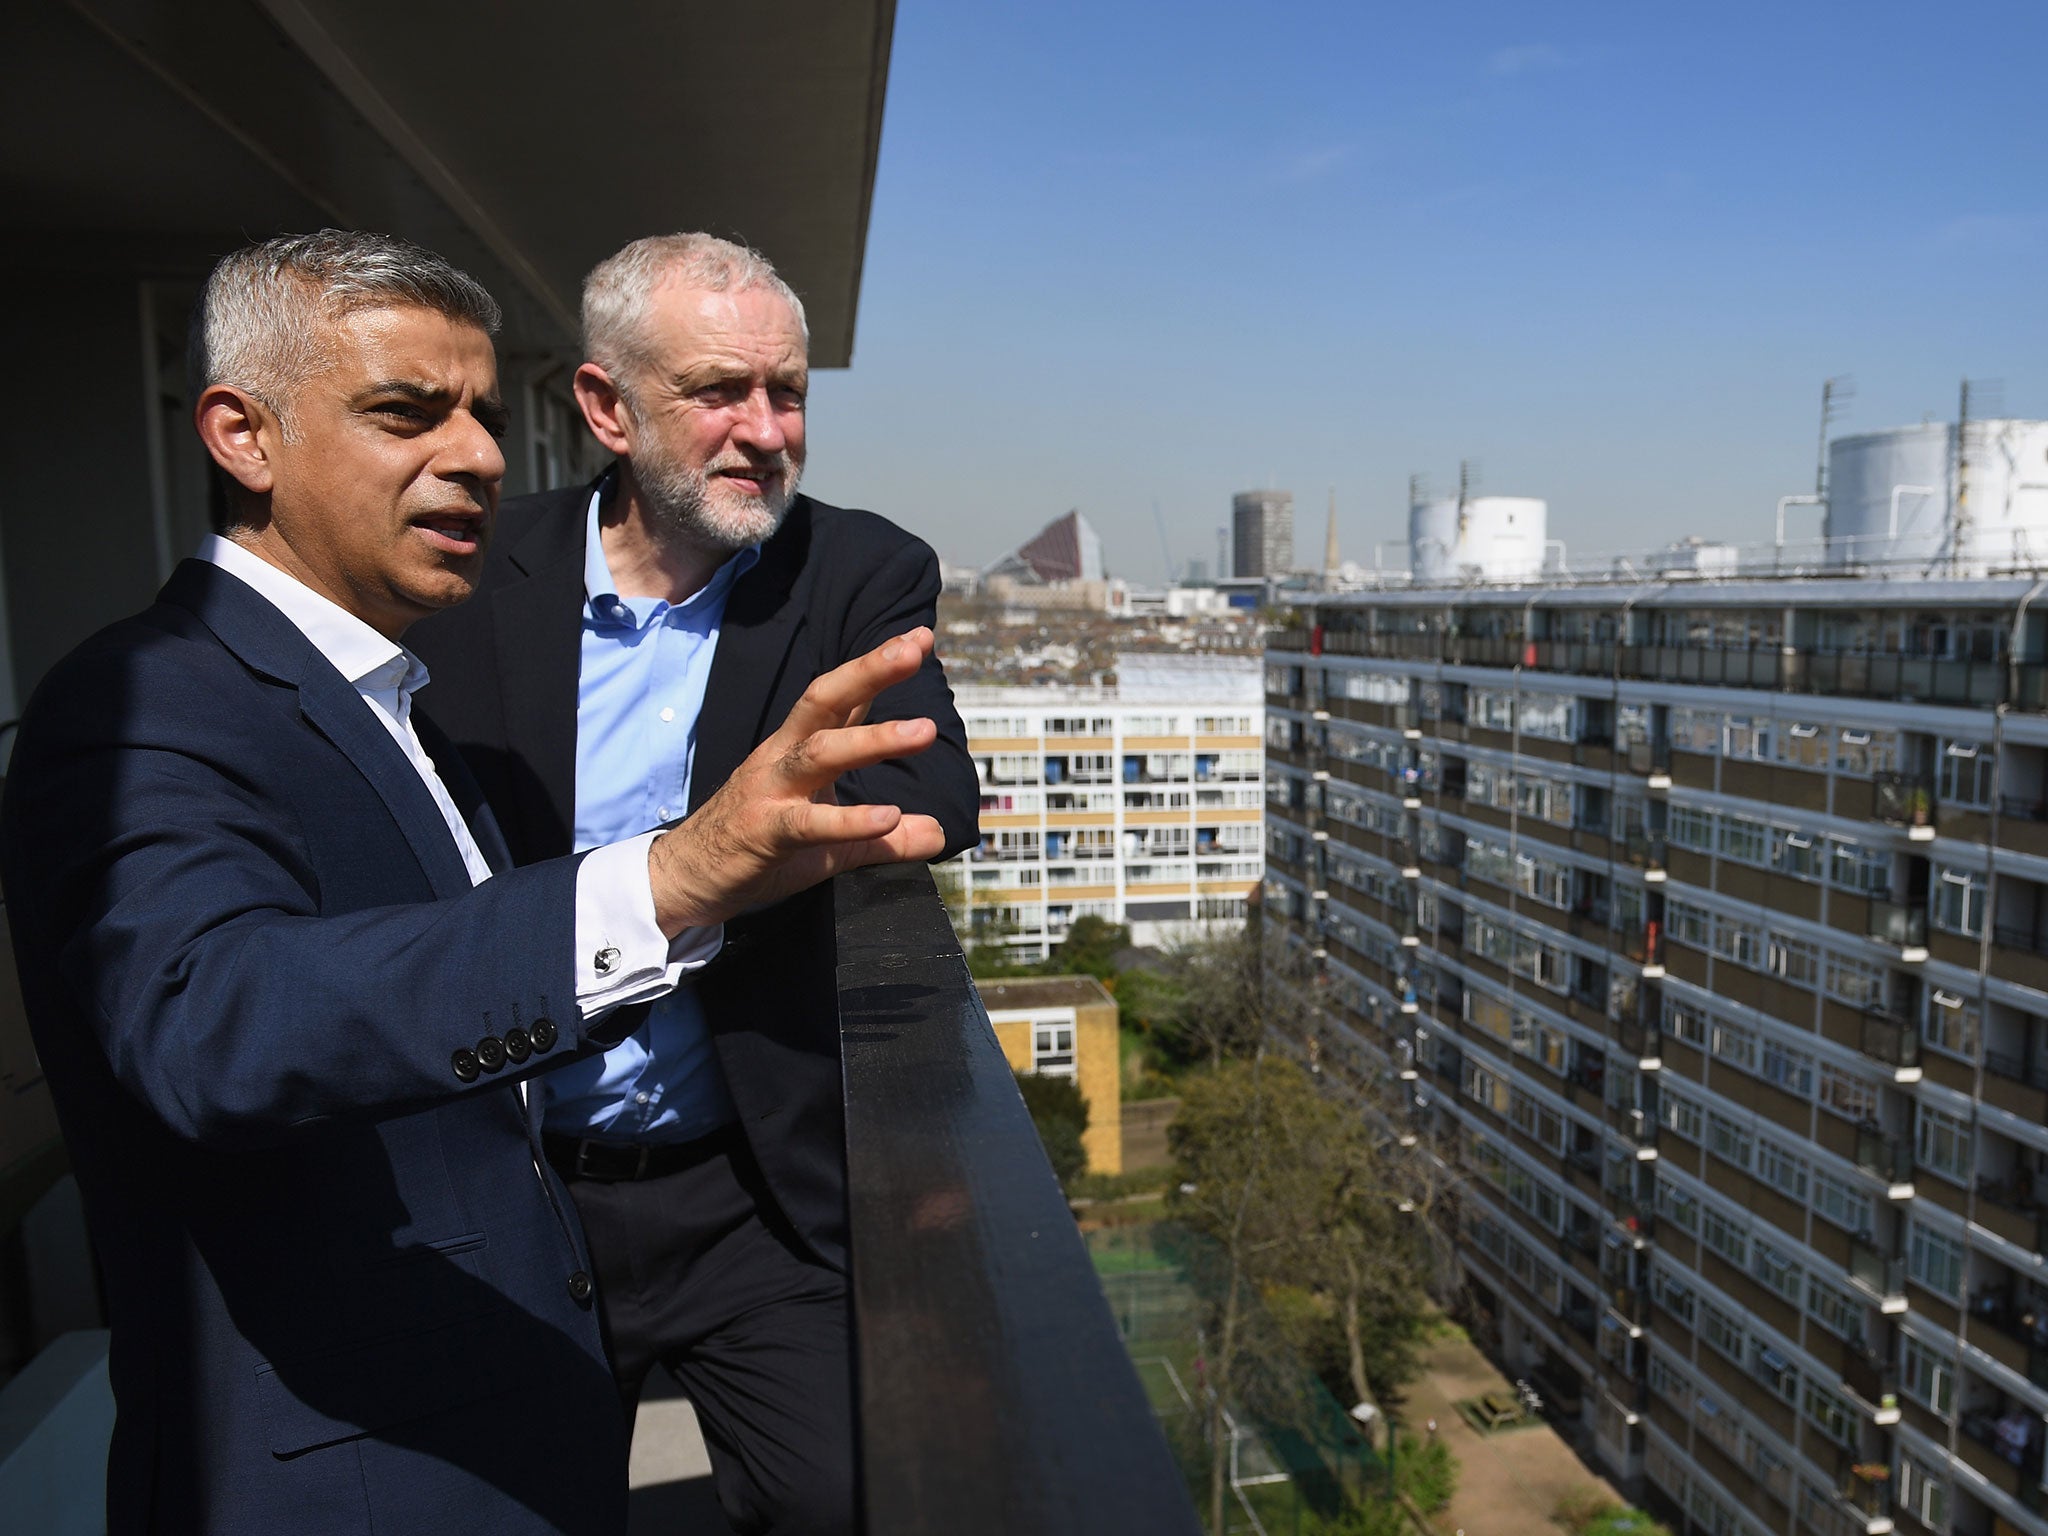 Sadiq Khan and Jeremy Corbyn following the launch of Labour's social housing review in April